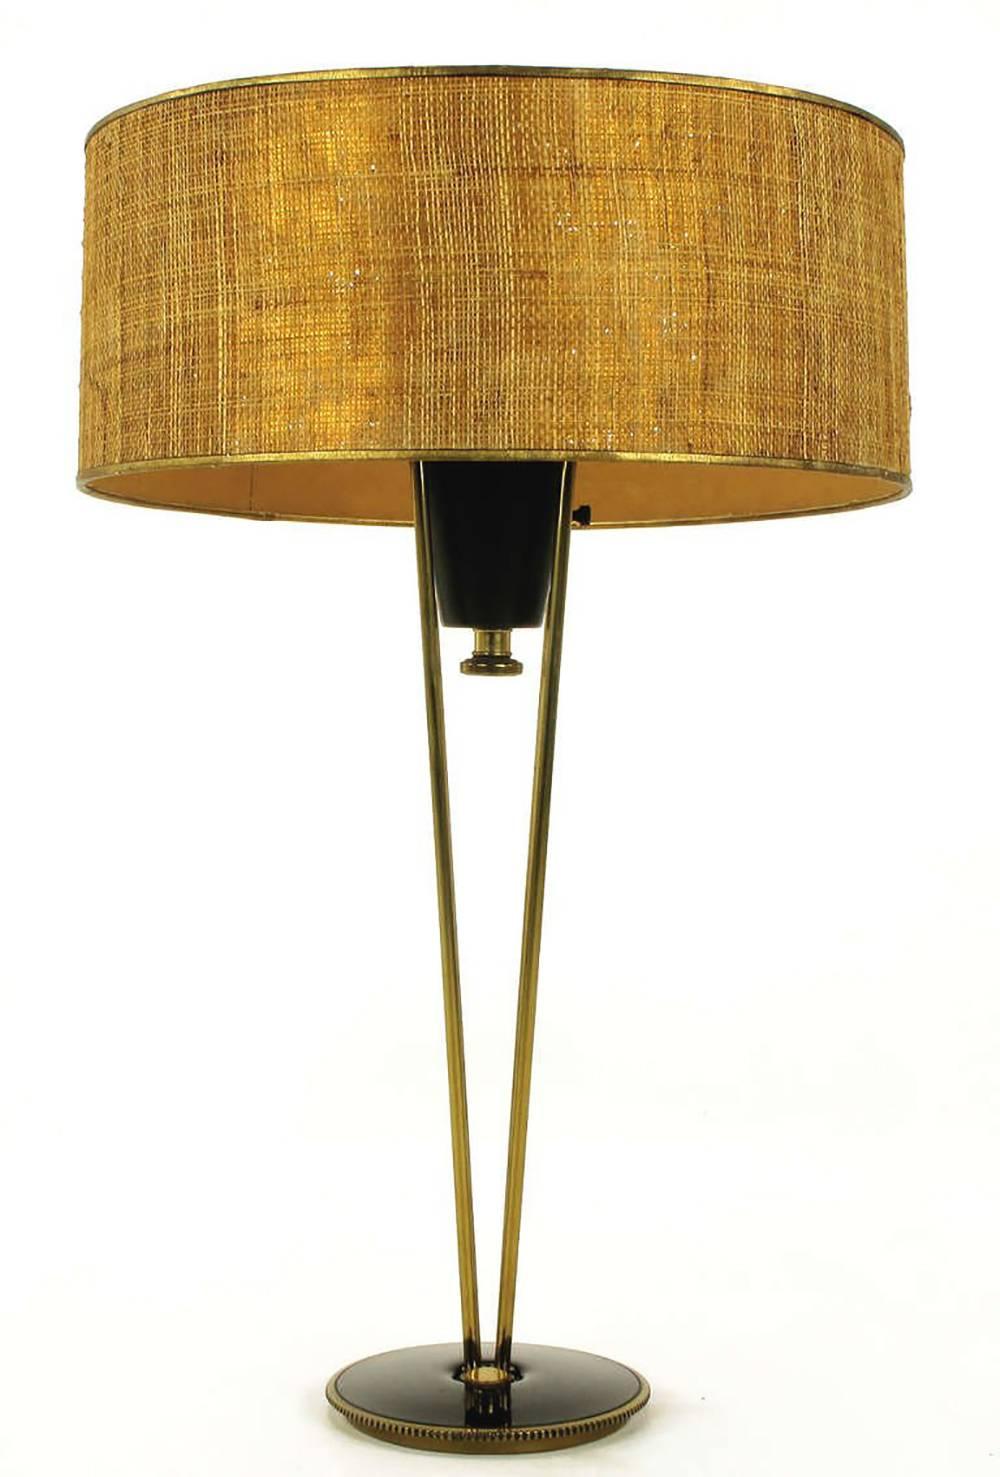 Rare 1950s Stiffel suspension table lamp. Four brass rods with ball finials support a black lacquered cup with internal light socket. Original off-white lacquered steel diffuser and burlap wrapped shade. Black lacquer and brass base is eight inches